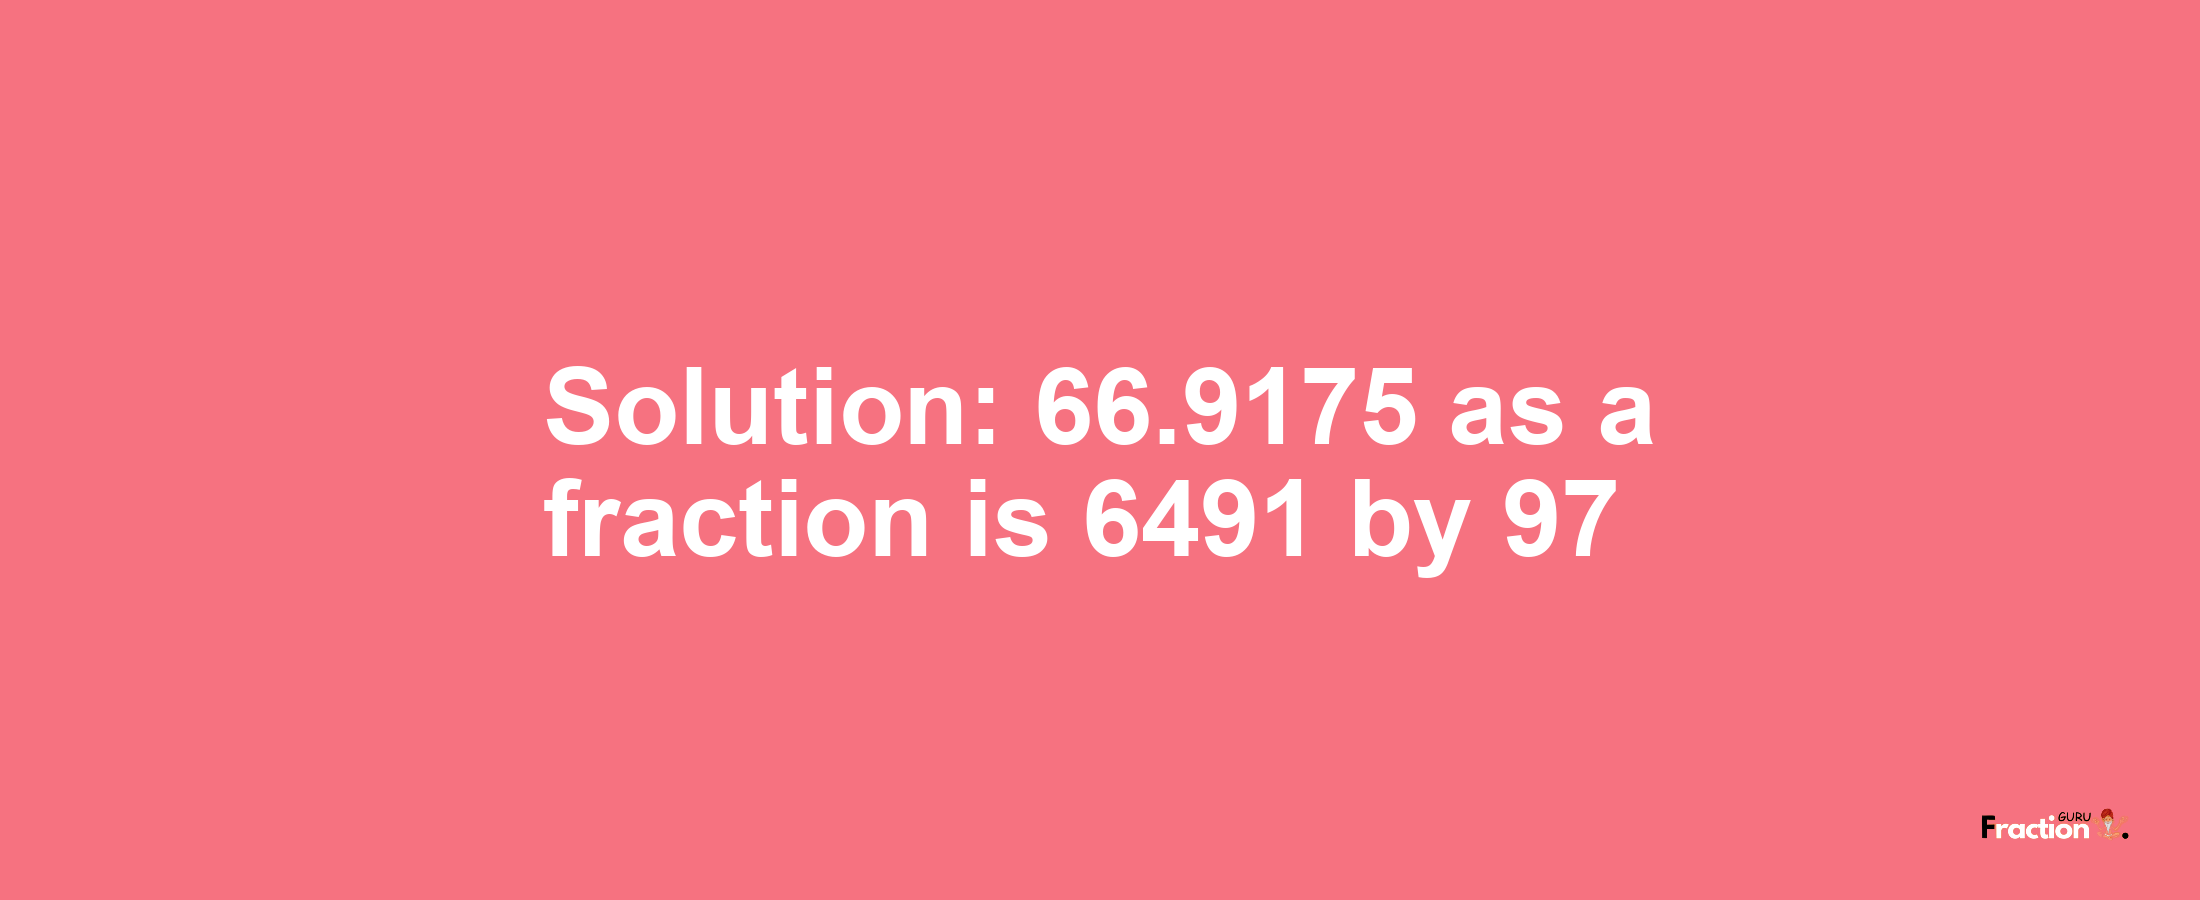 Solution:66.9175 as a fraction is 6491/97